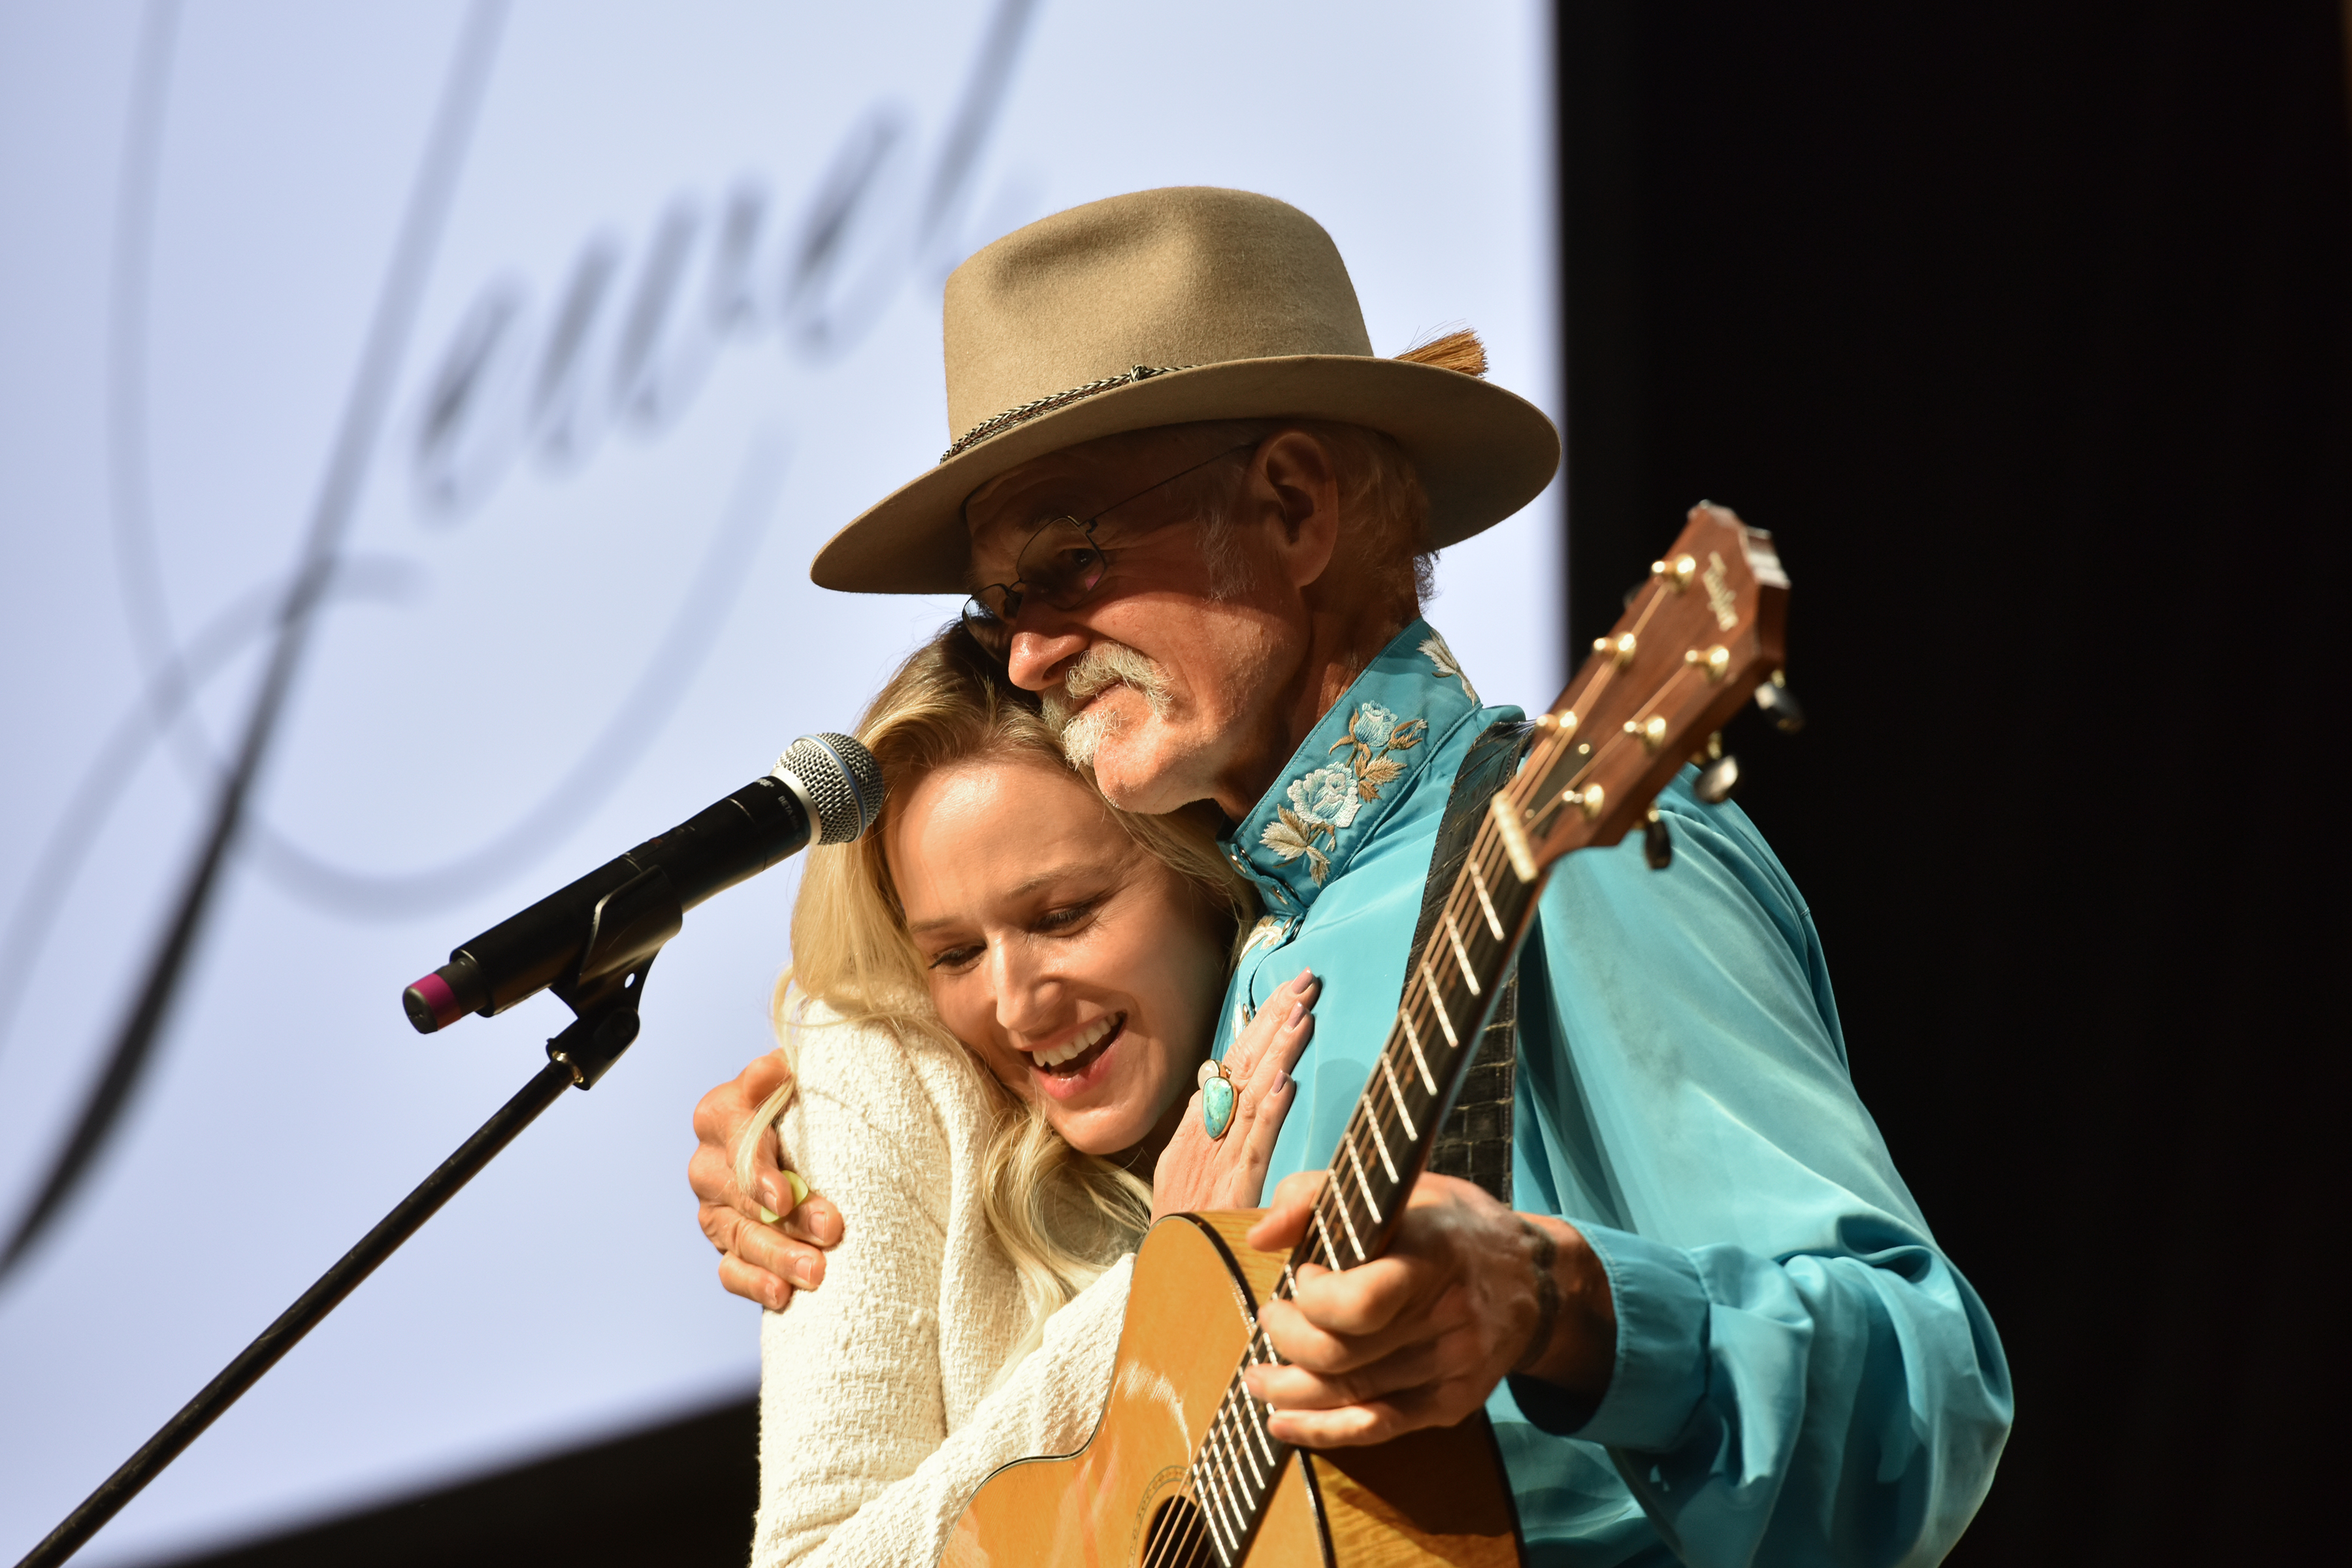 Jewel with her Atz Kilcher on stage during the first day of the Wellness Your Way Festival in Denver, Colorado, on August 16, 2019. | Source: Getty Images